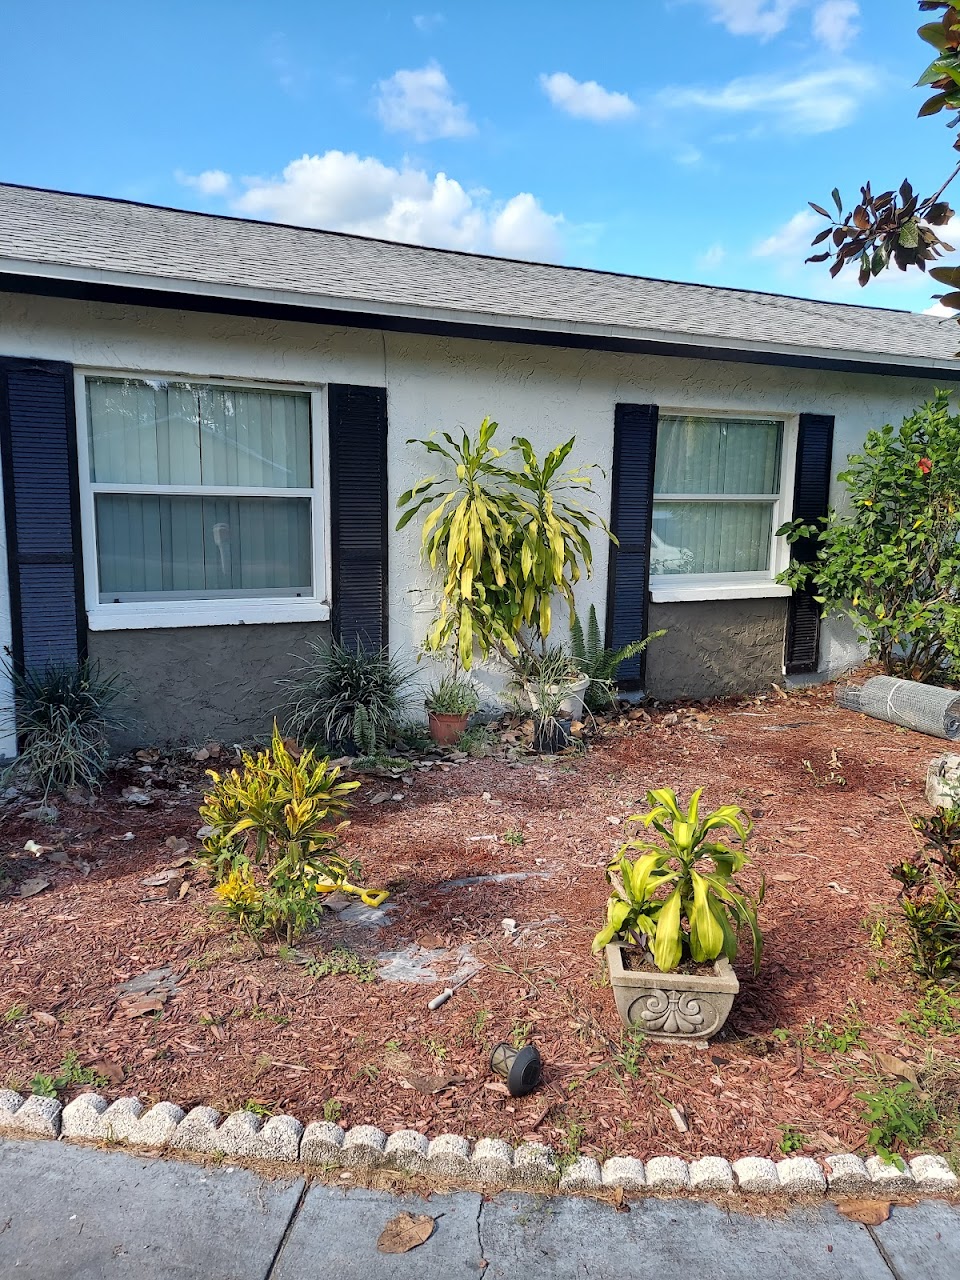 Photo of CINNAMON COVE. Affordable housing located at 12401 N 15TH ST TAMPA, FL 33612